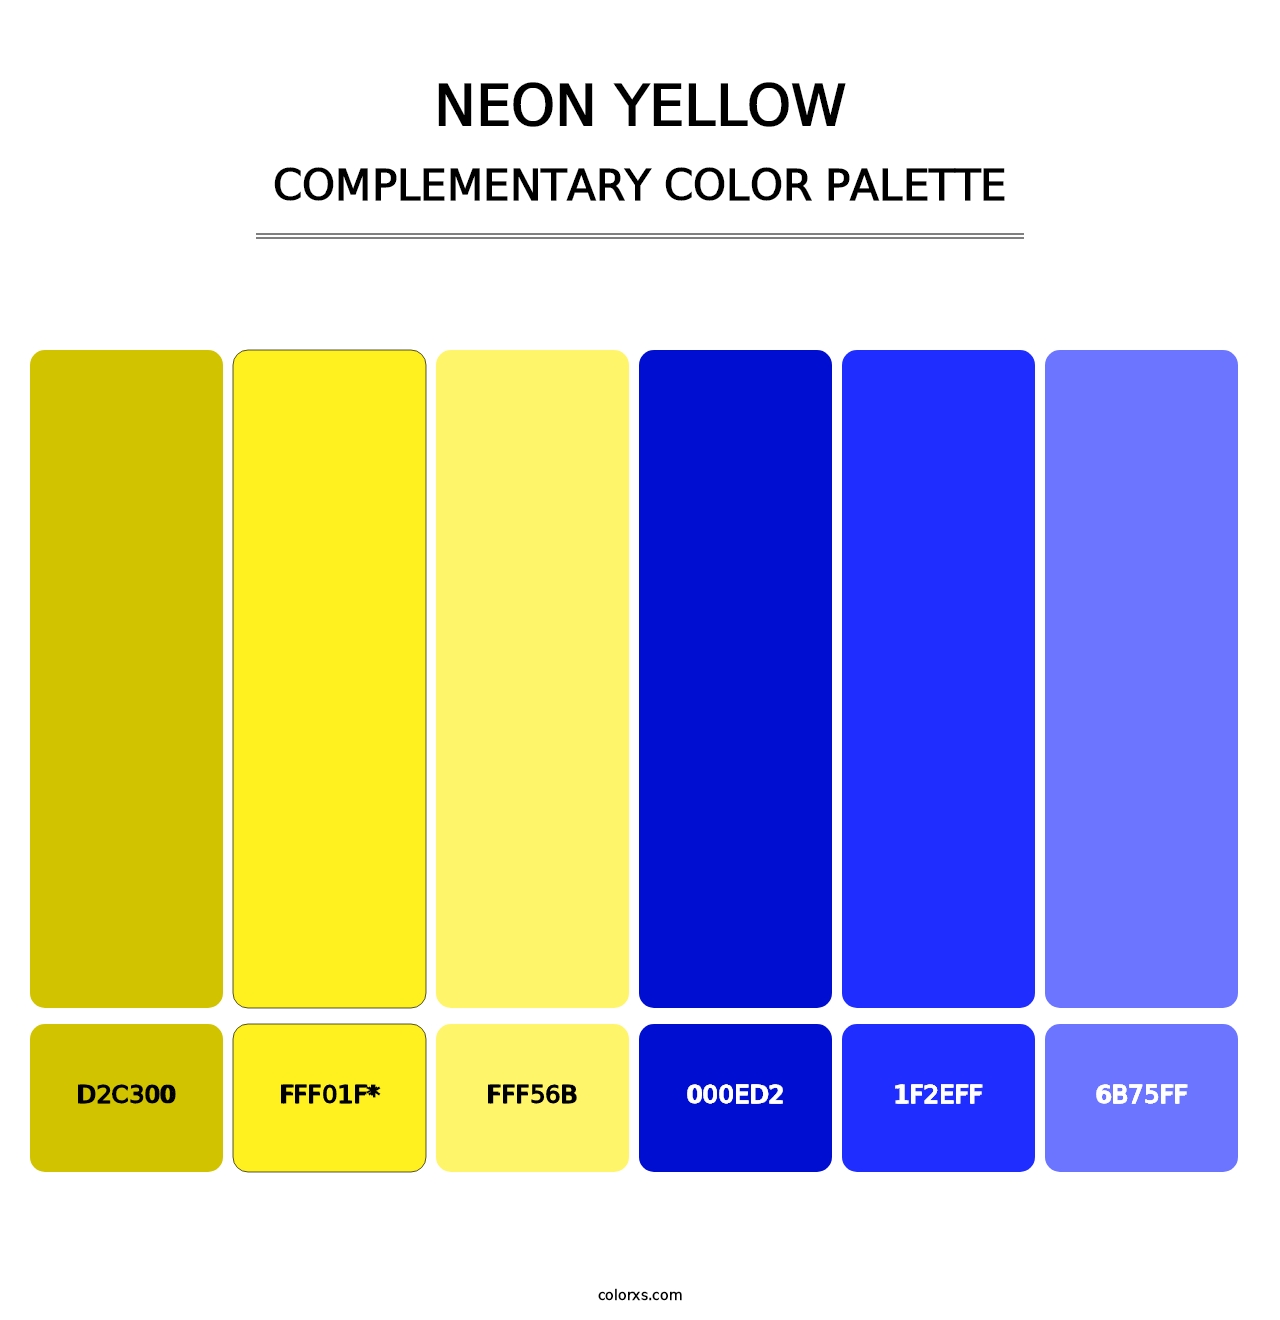 Neon Yellow - Complementary Color Palette